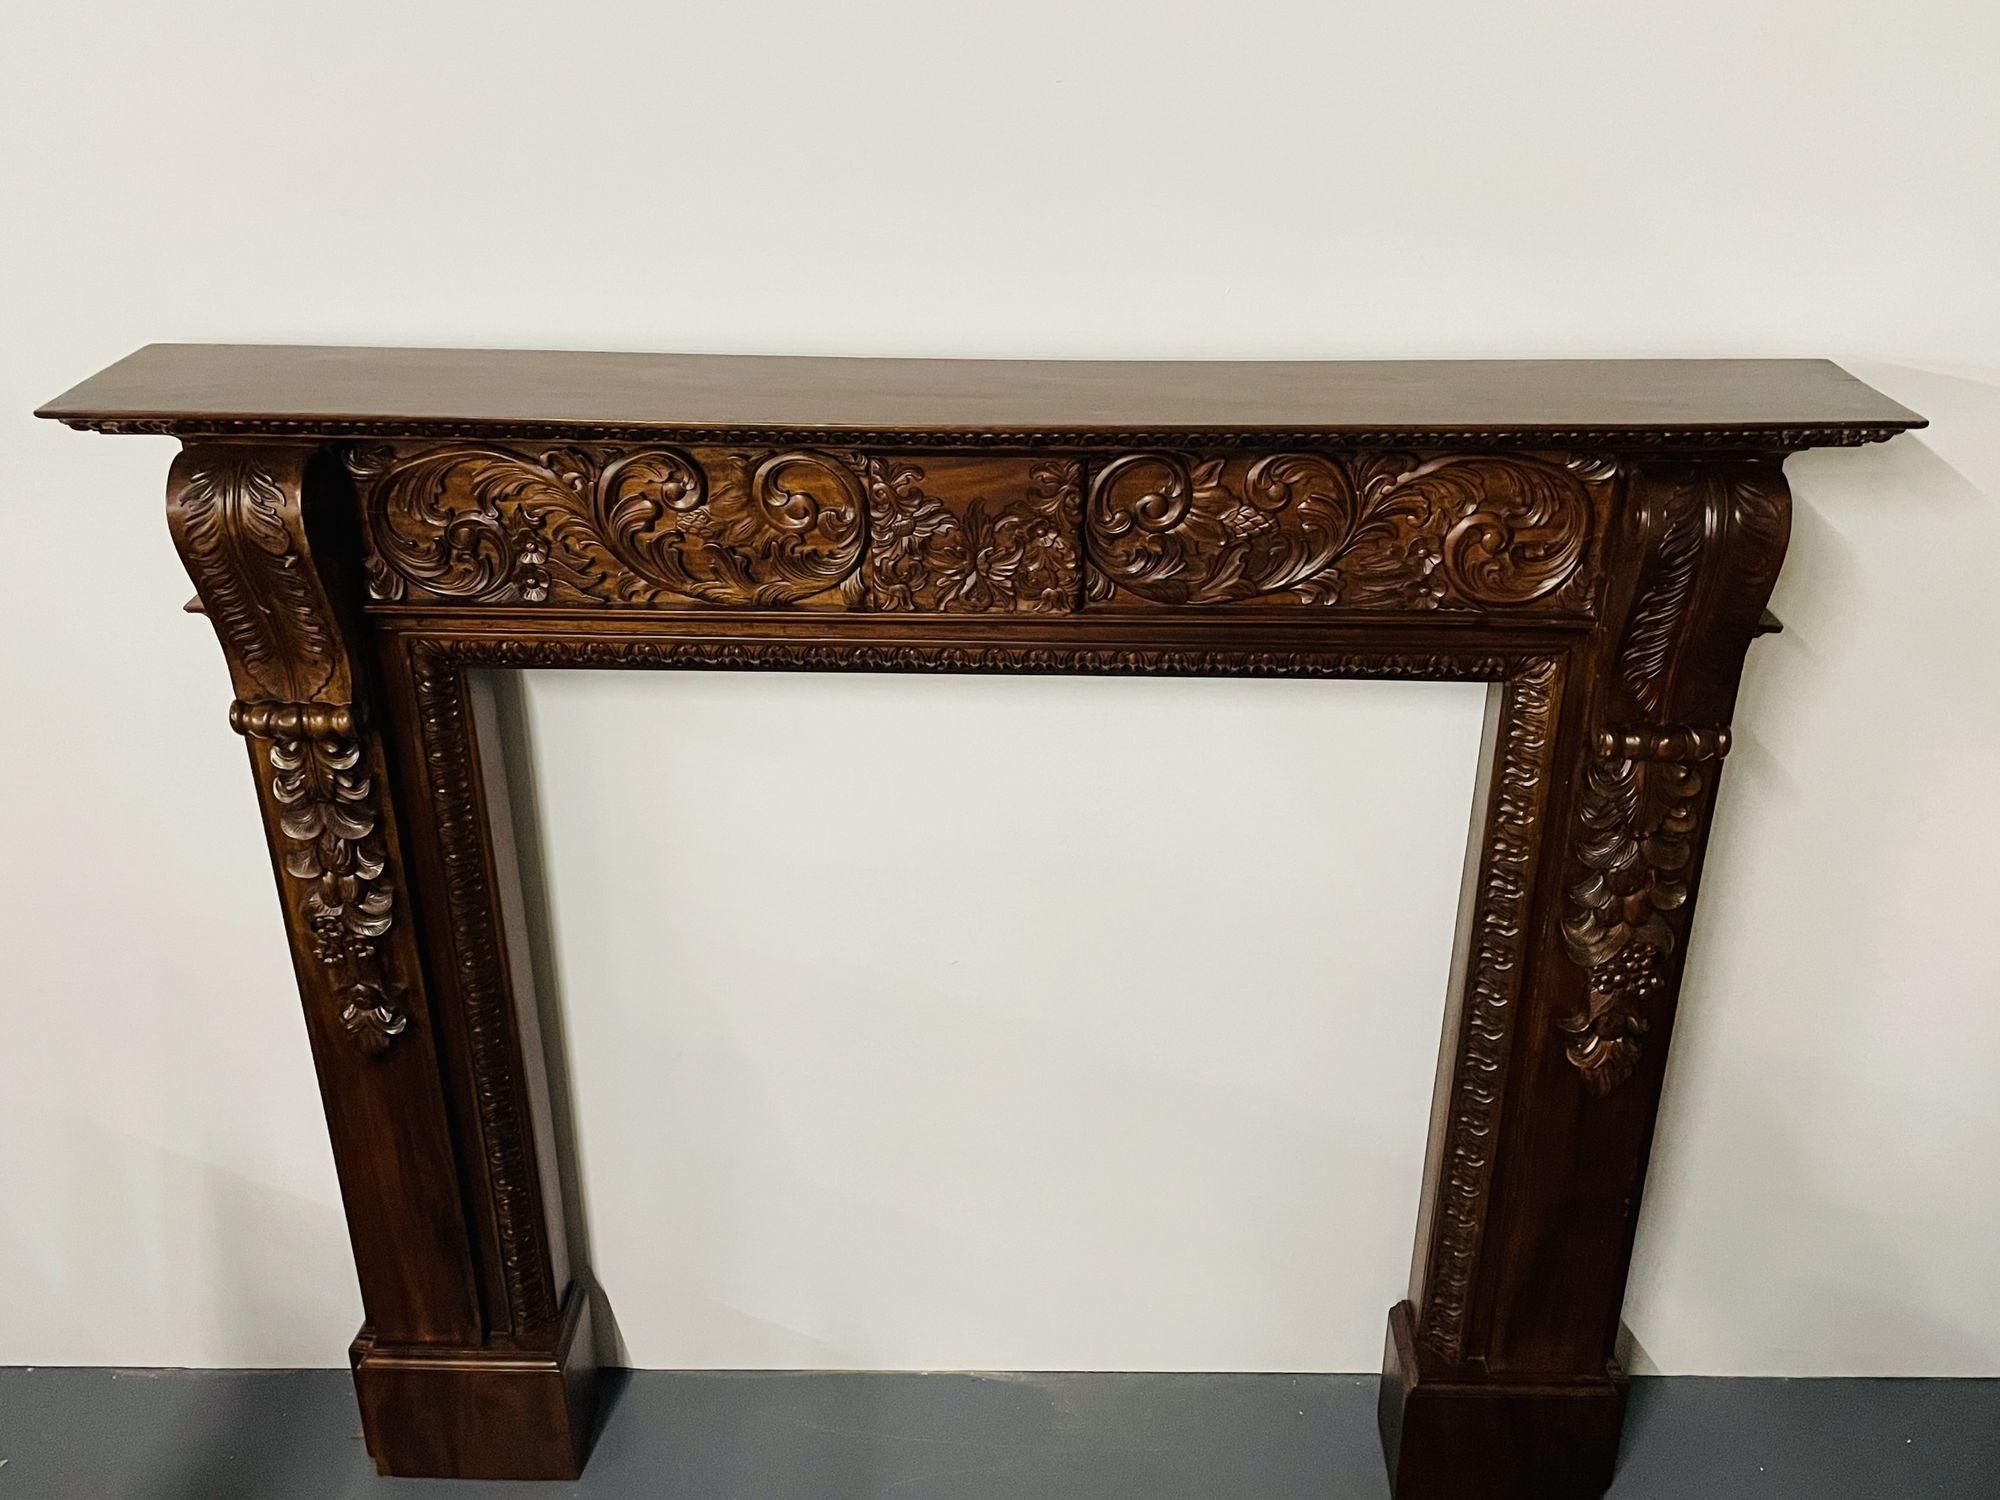 A Custom Cabinet Maker Fire Mantle or Fire Surround. 
 
This stunning solid mahogany mantle was take from one of Long Islands most pretigious home. Having finely detailed box wood design with all around mouldings the case itself is wonderfully